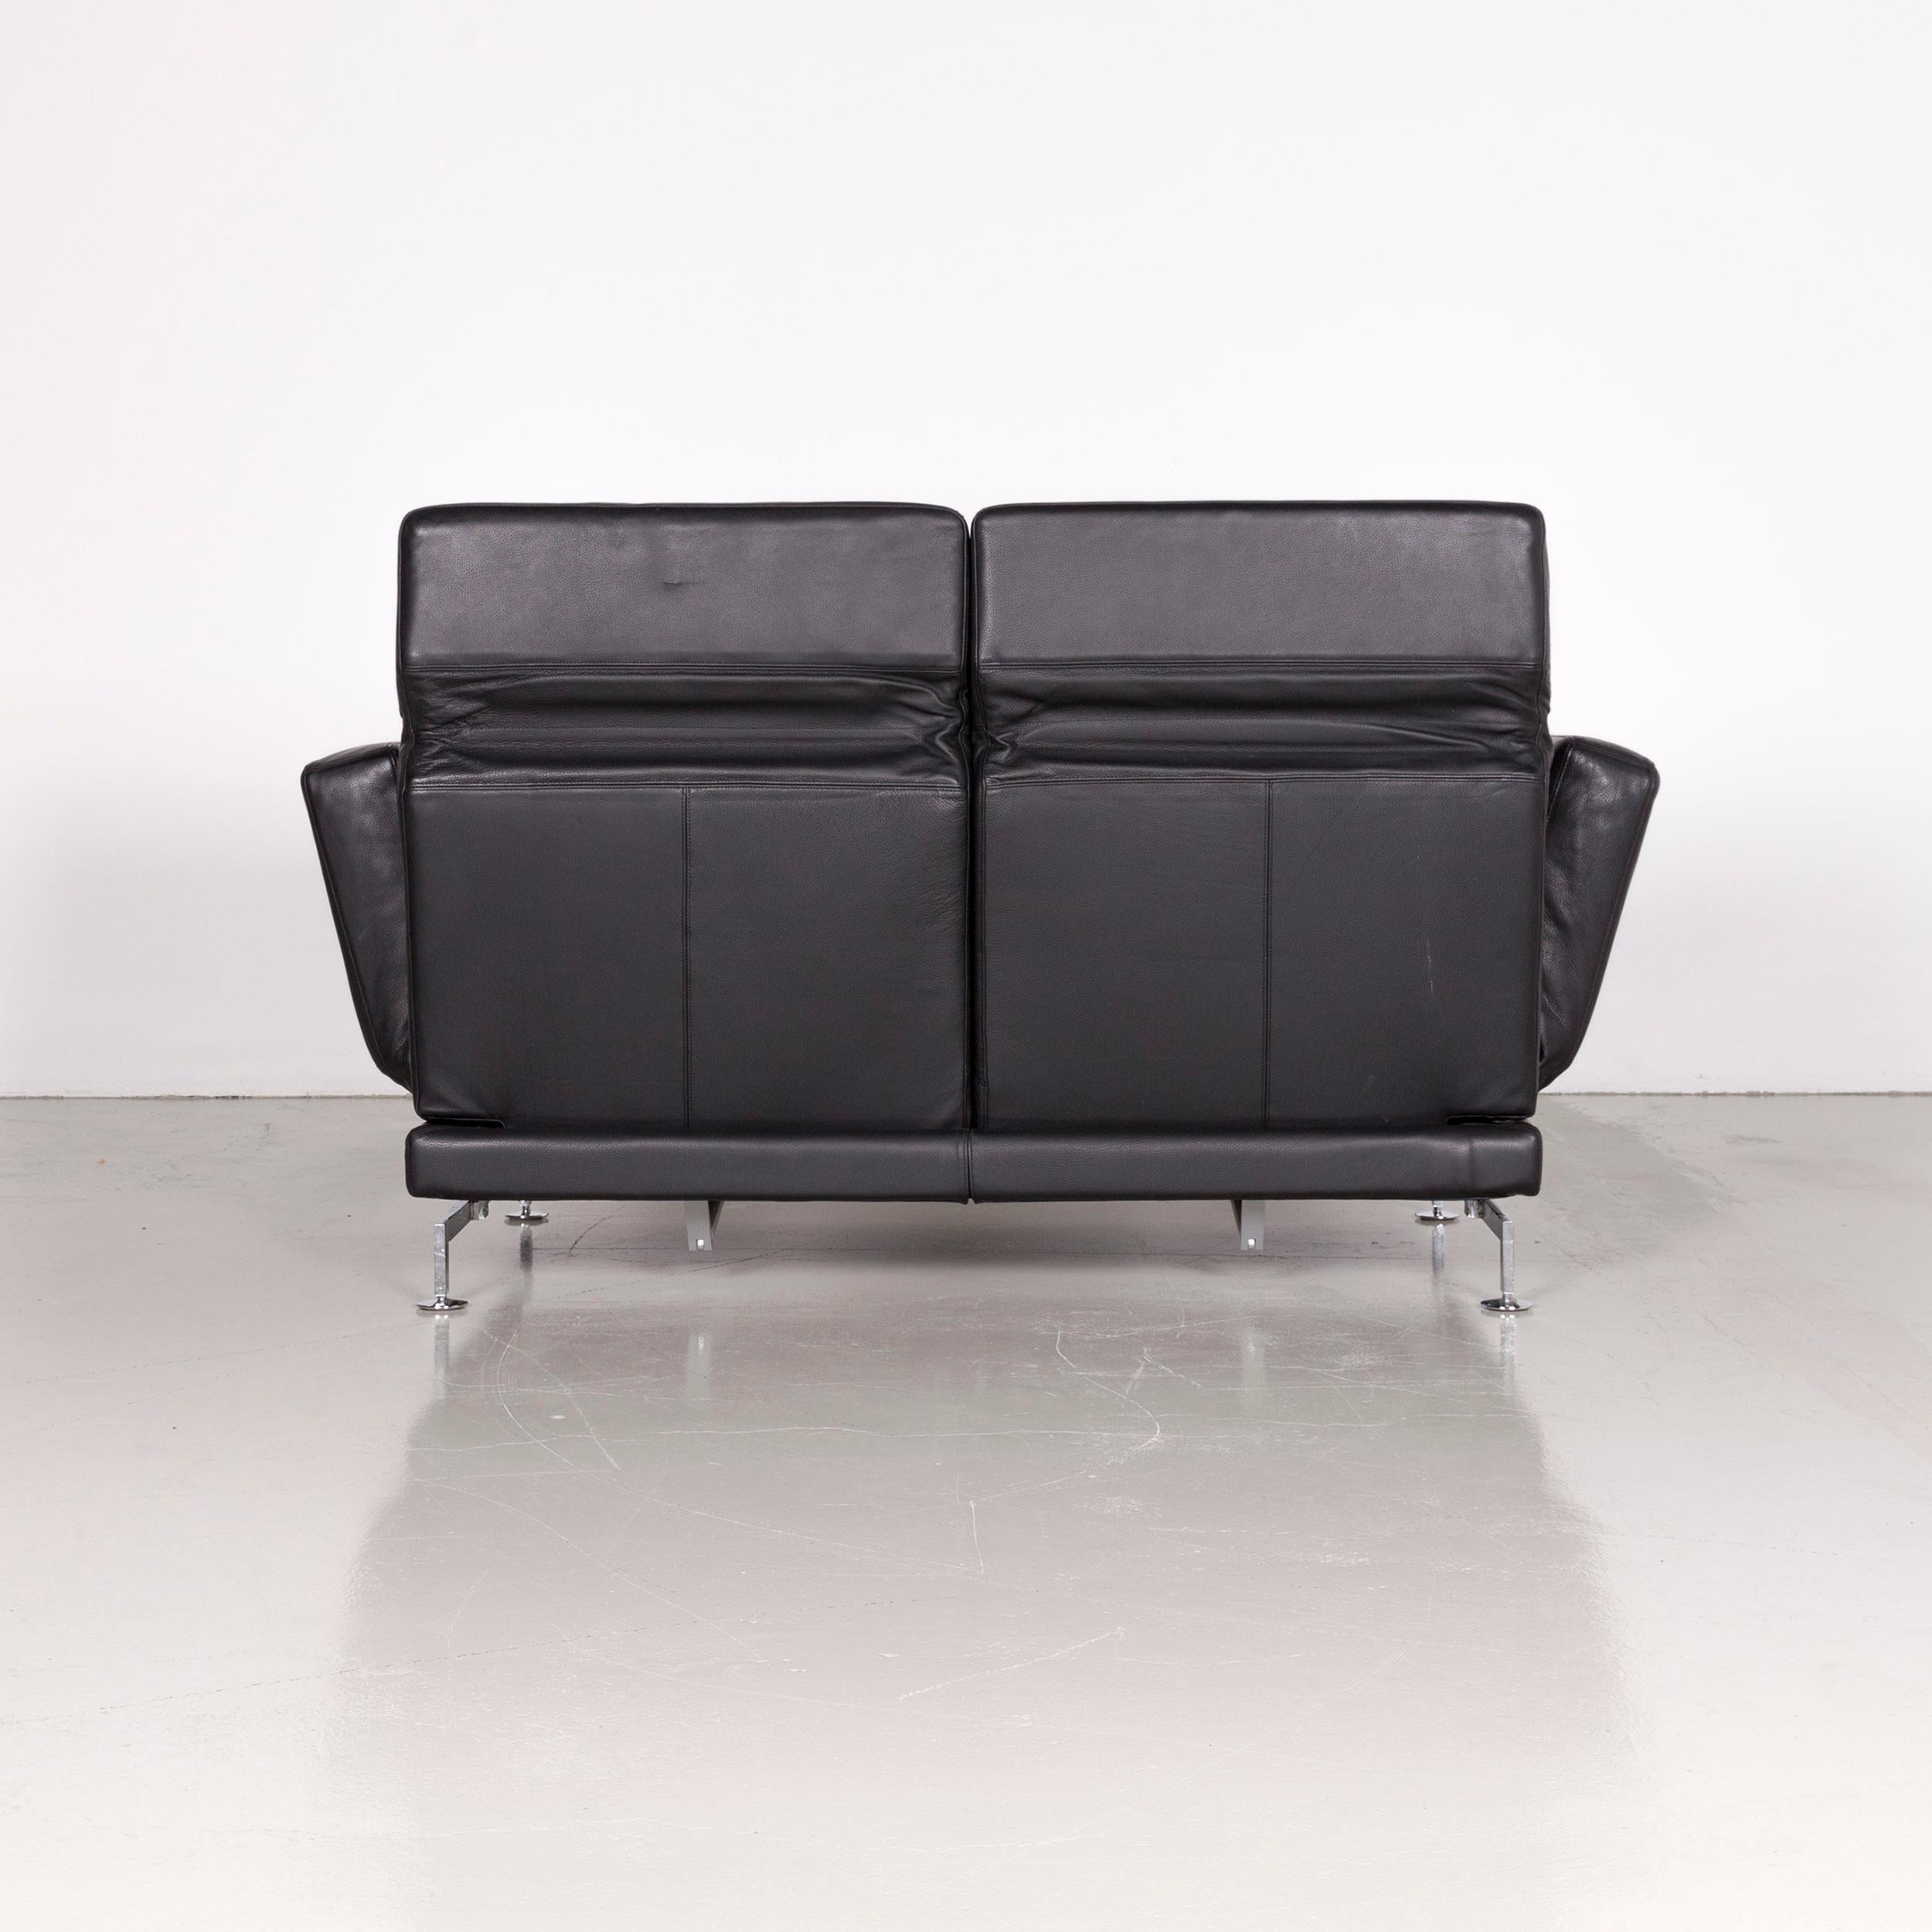 Brühl & Sippold Moule Designer Leather Sofa Black Two-Seat Couch with Function 6